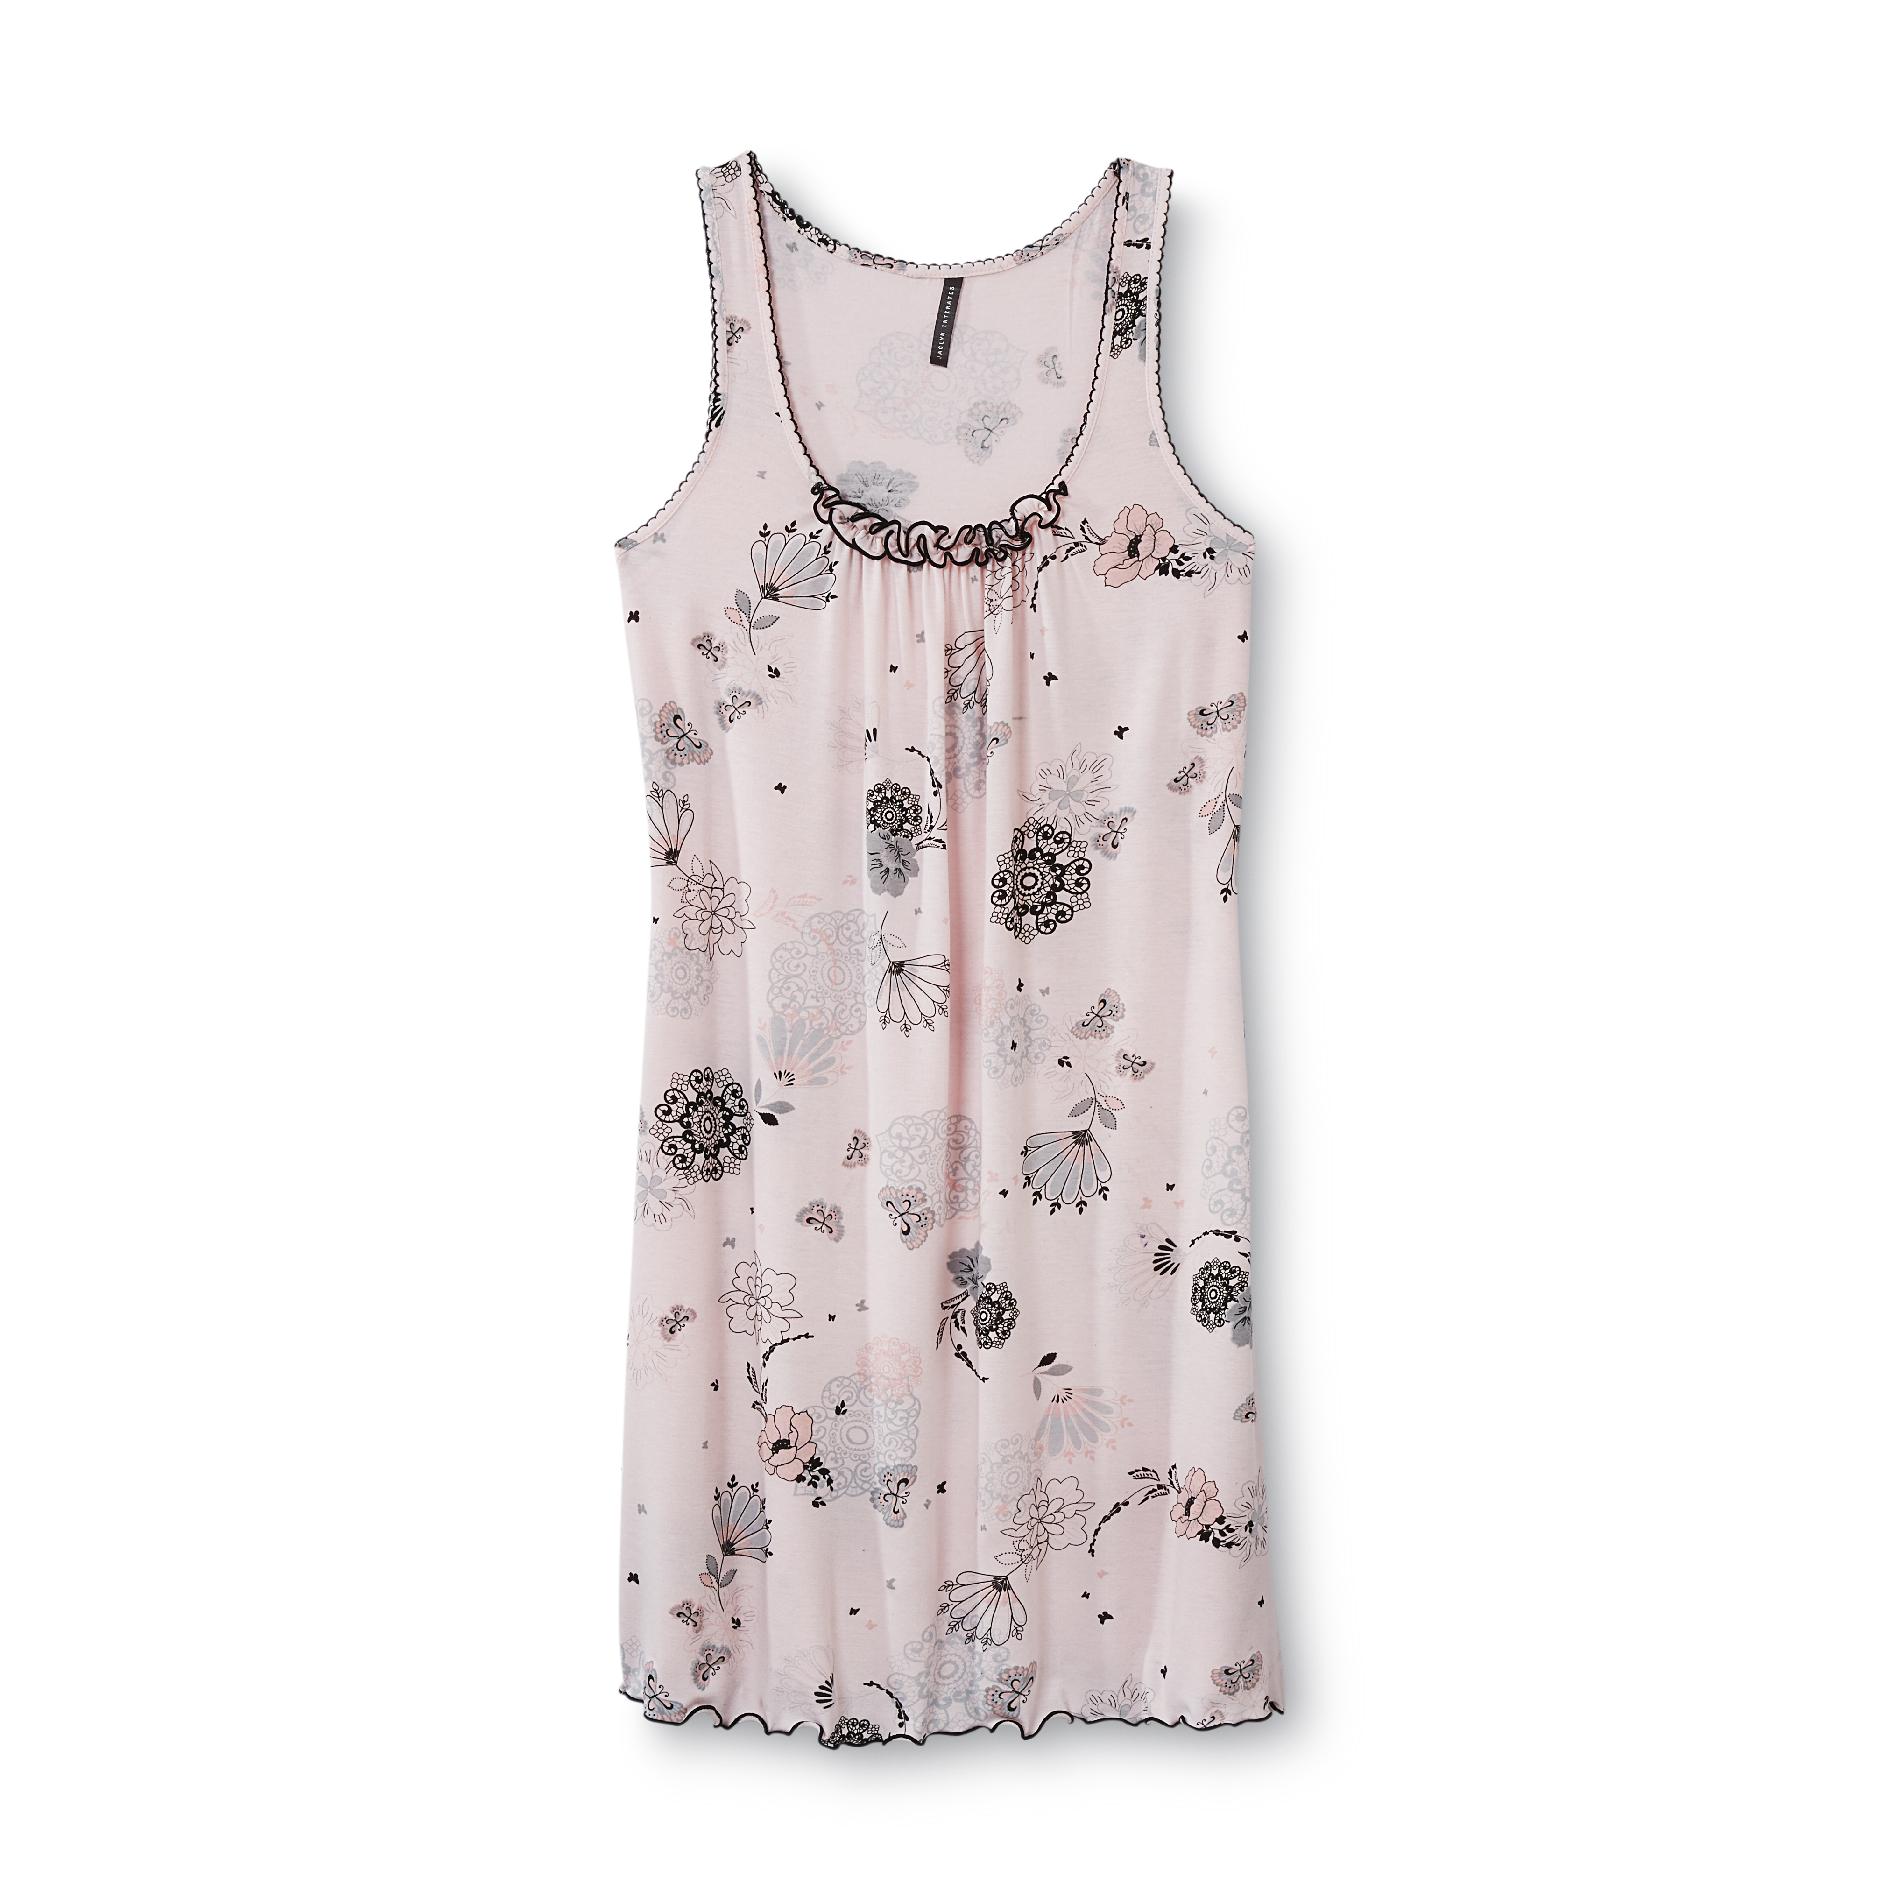 Jaclyn Intimates Women's Chemise Nightgown - Floral